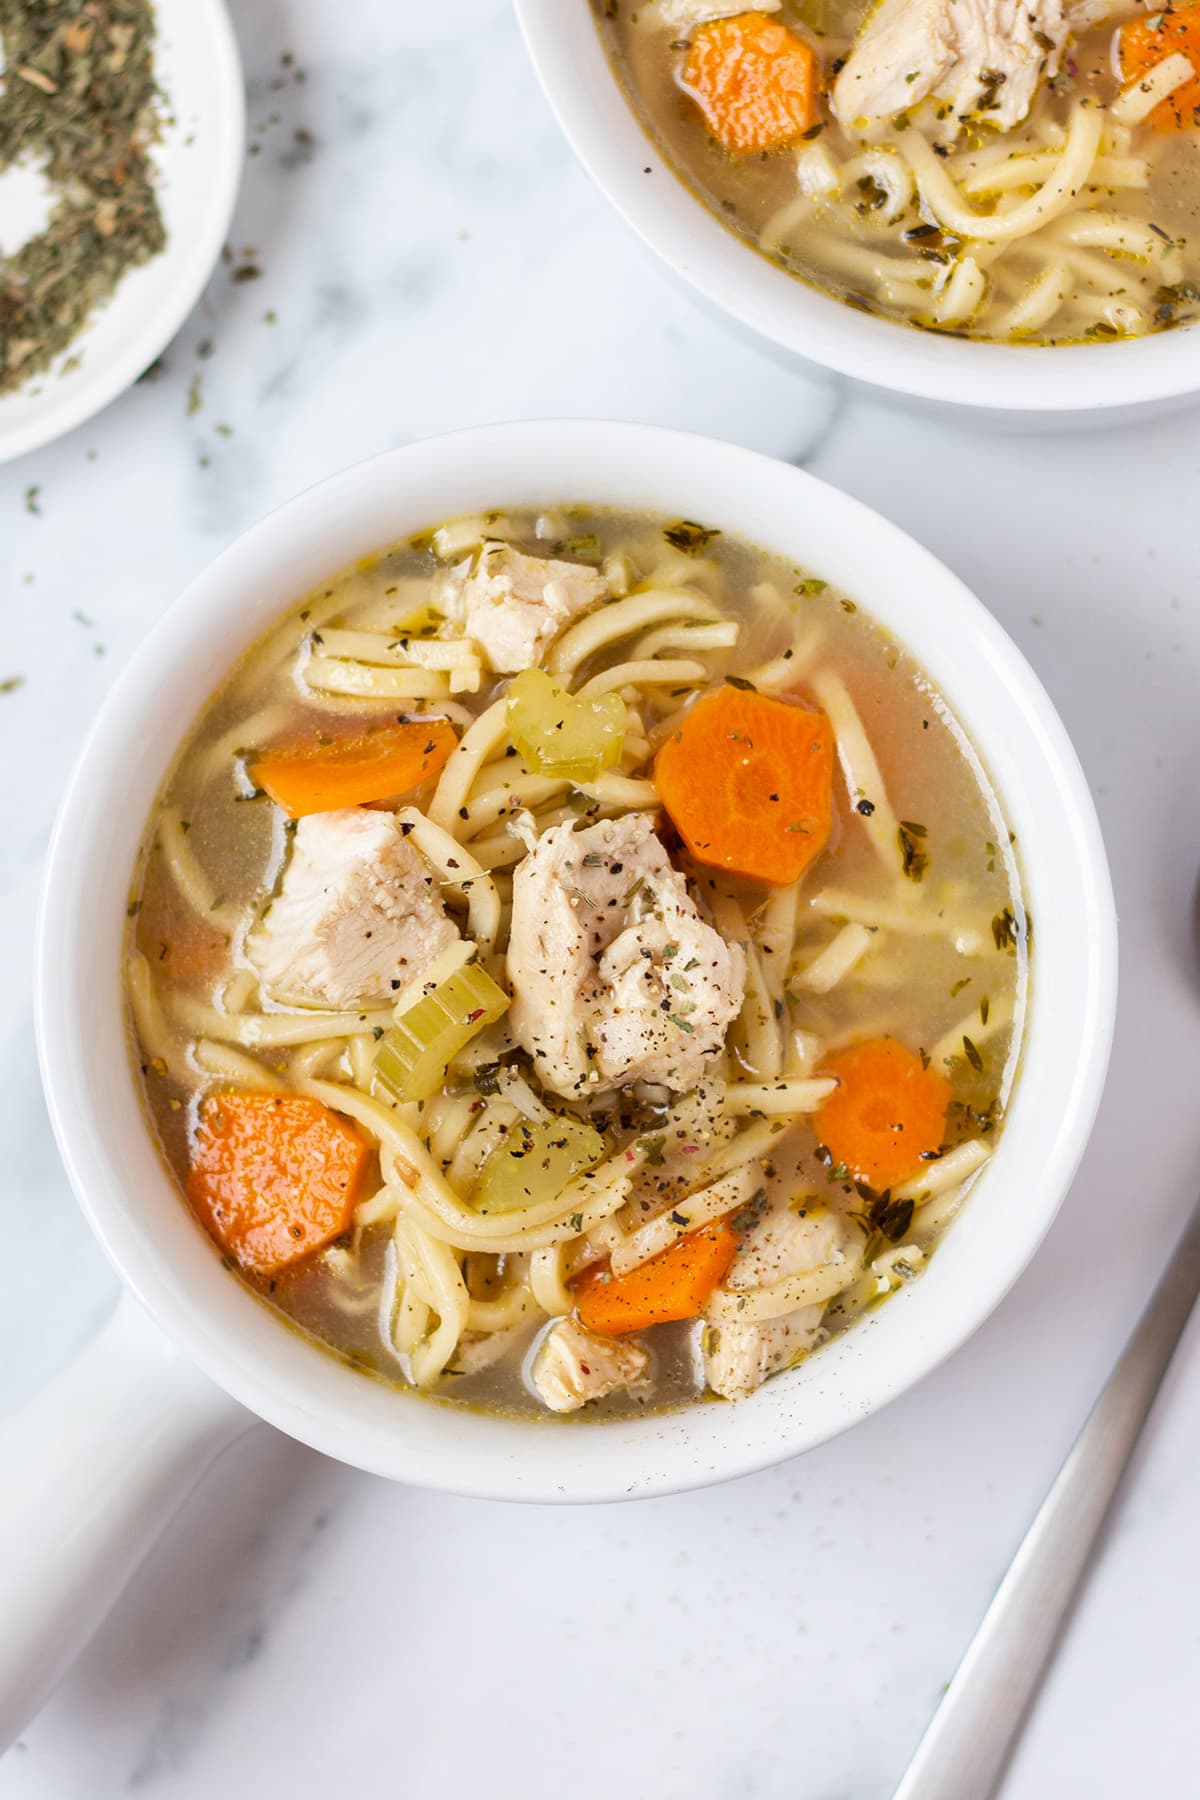 Top-down look at a bowl of chunky chicken noodle soup with broth and sliced carrots.